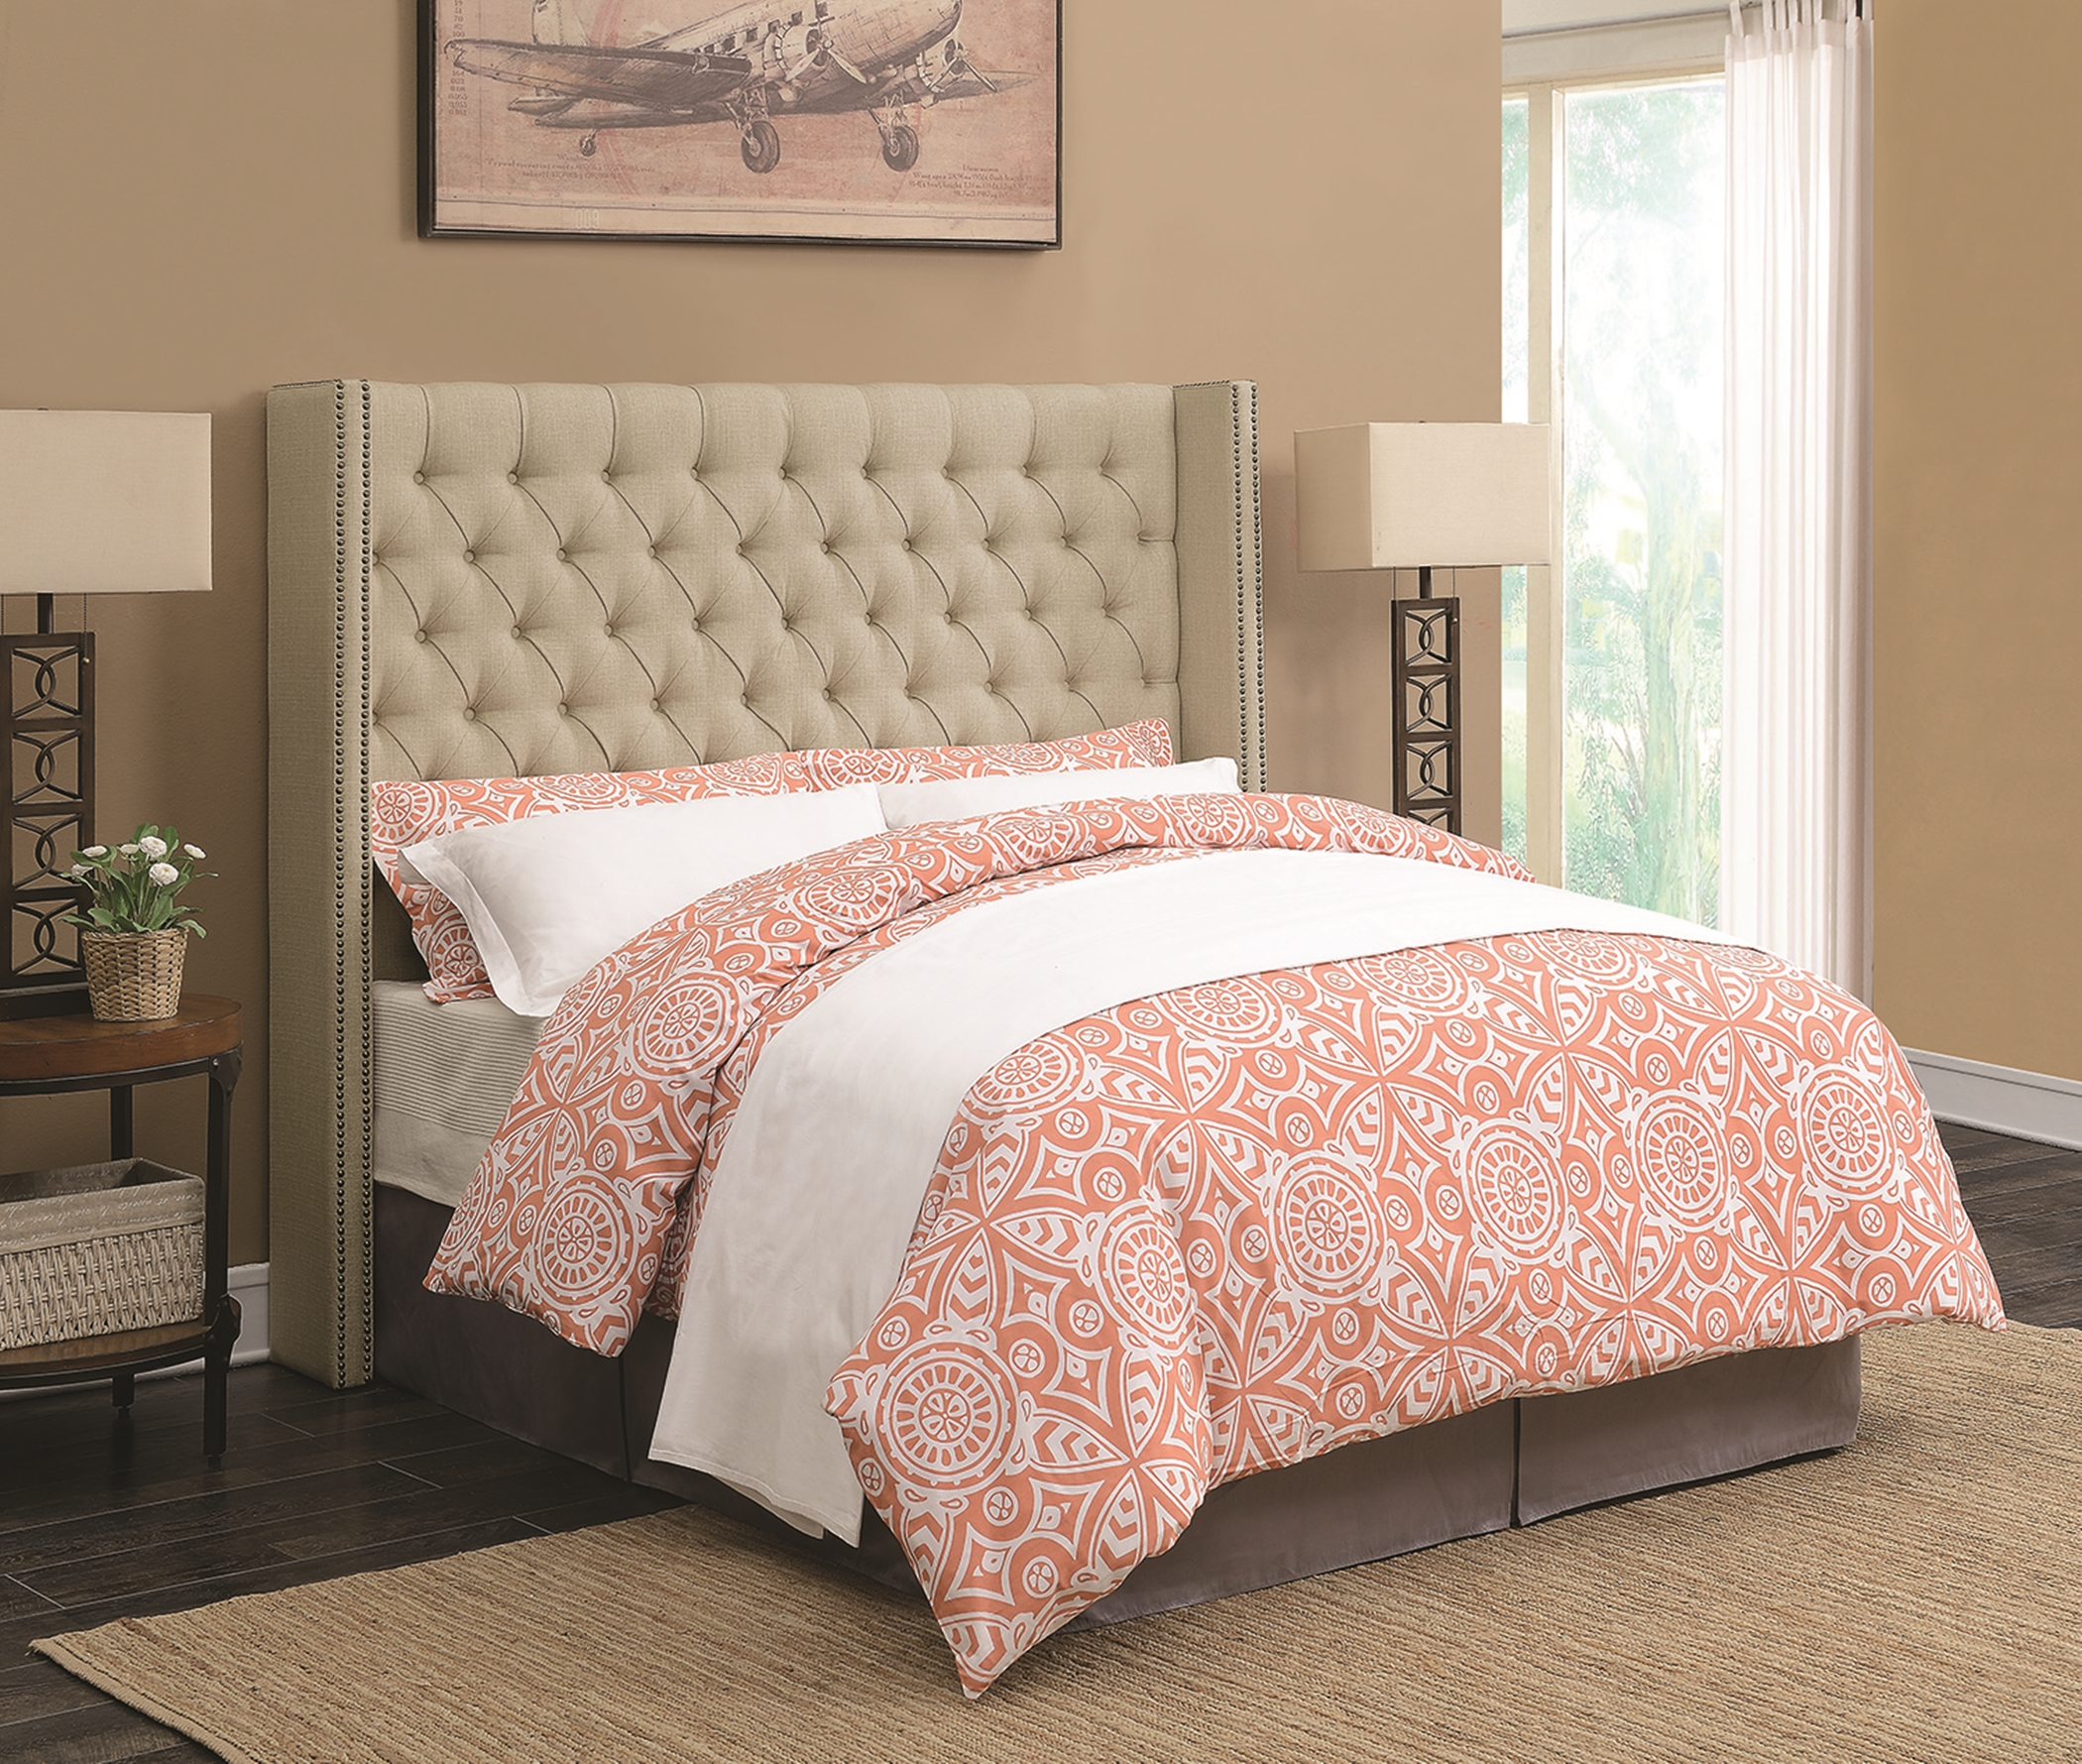 Benicia Beige Upholstered Queen Headboard - Click Image to Close